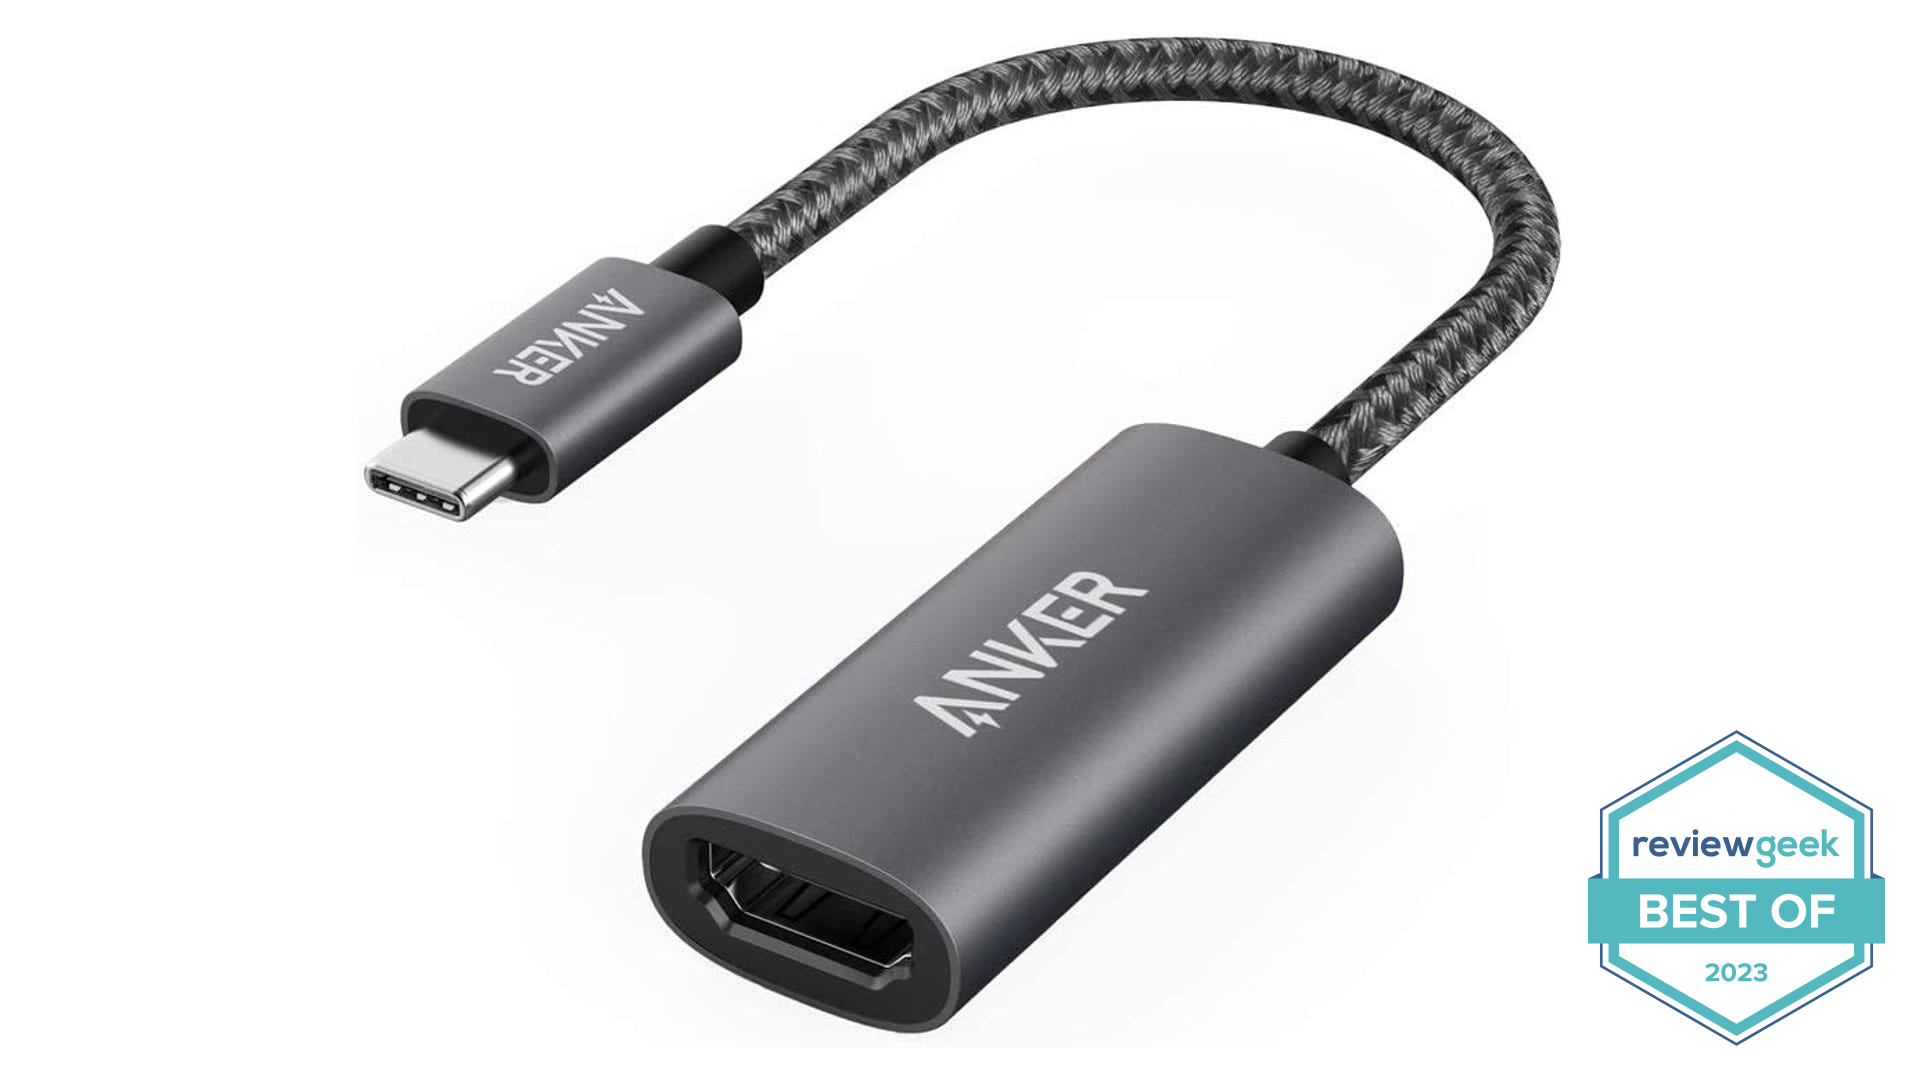 Anker USB-C to HDMI Converter on a white background